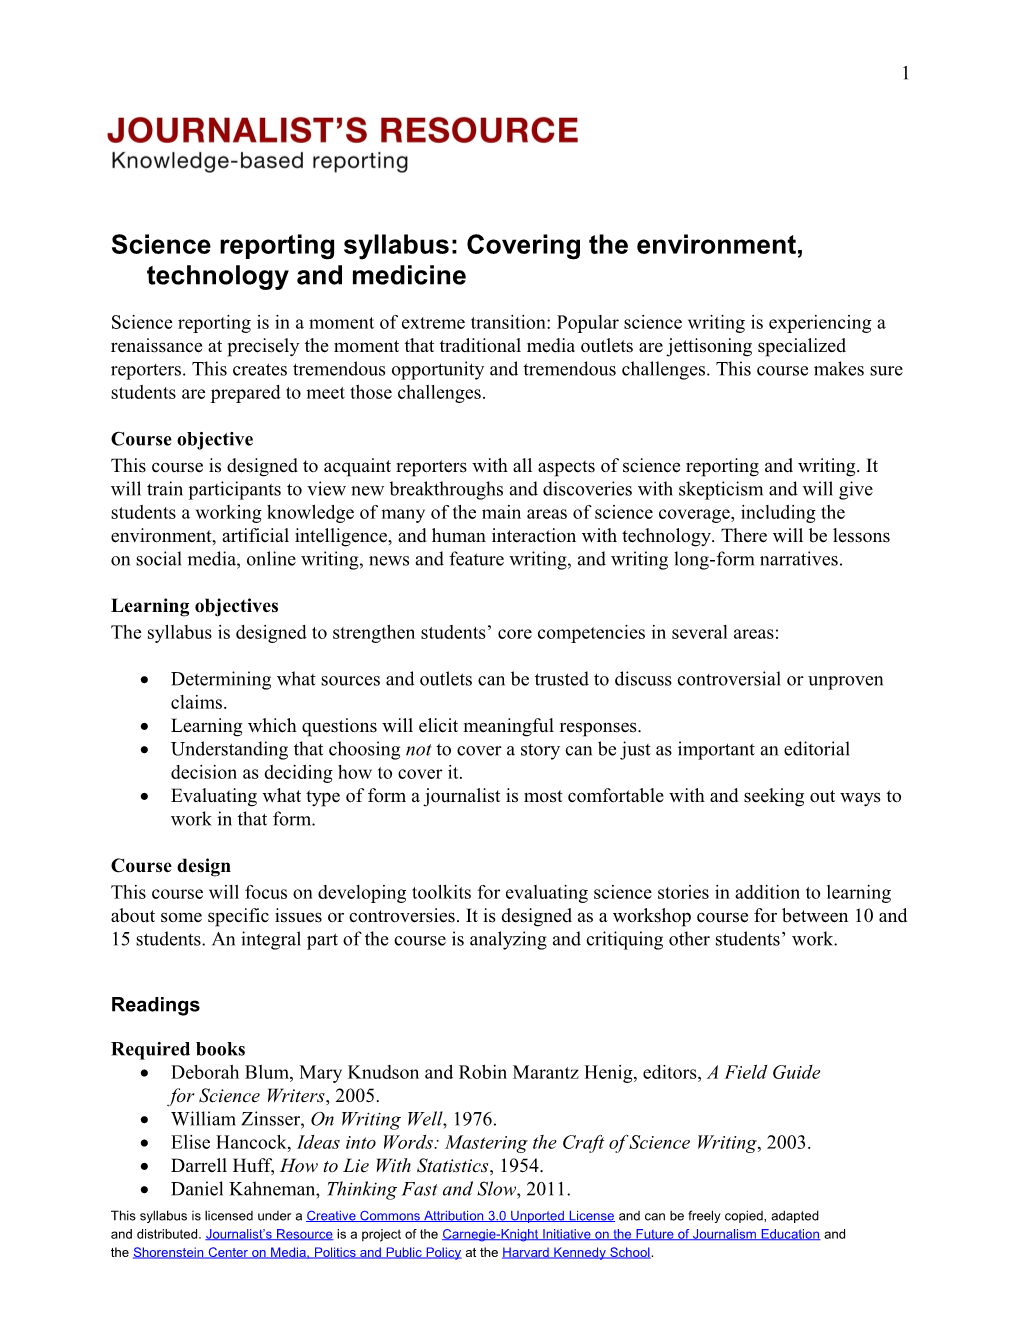 Science Reporting Syllabus: Covering the Environment, Technology and Medicine